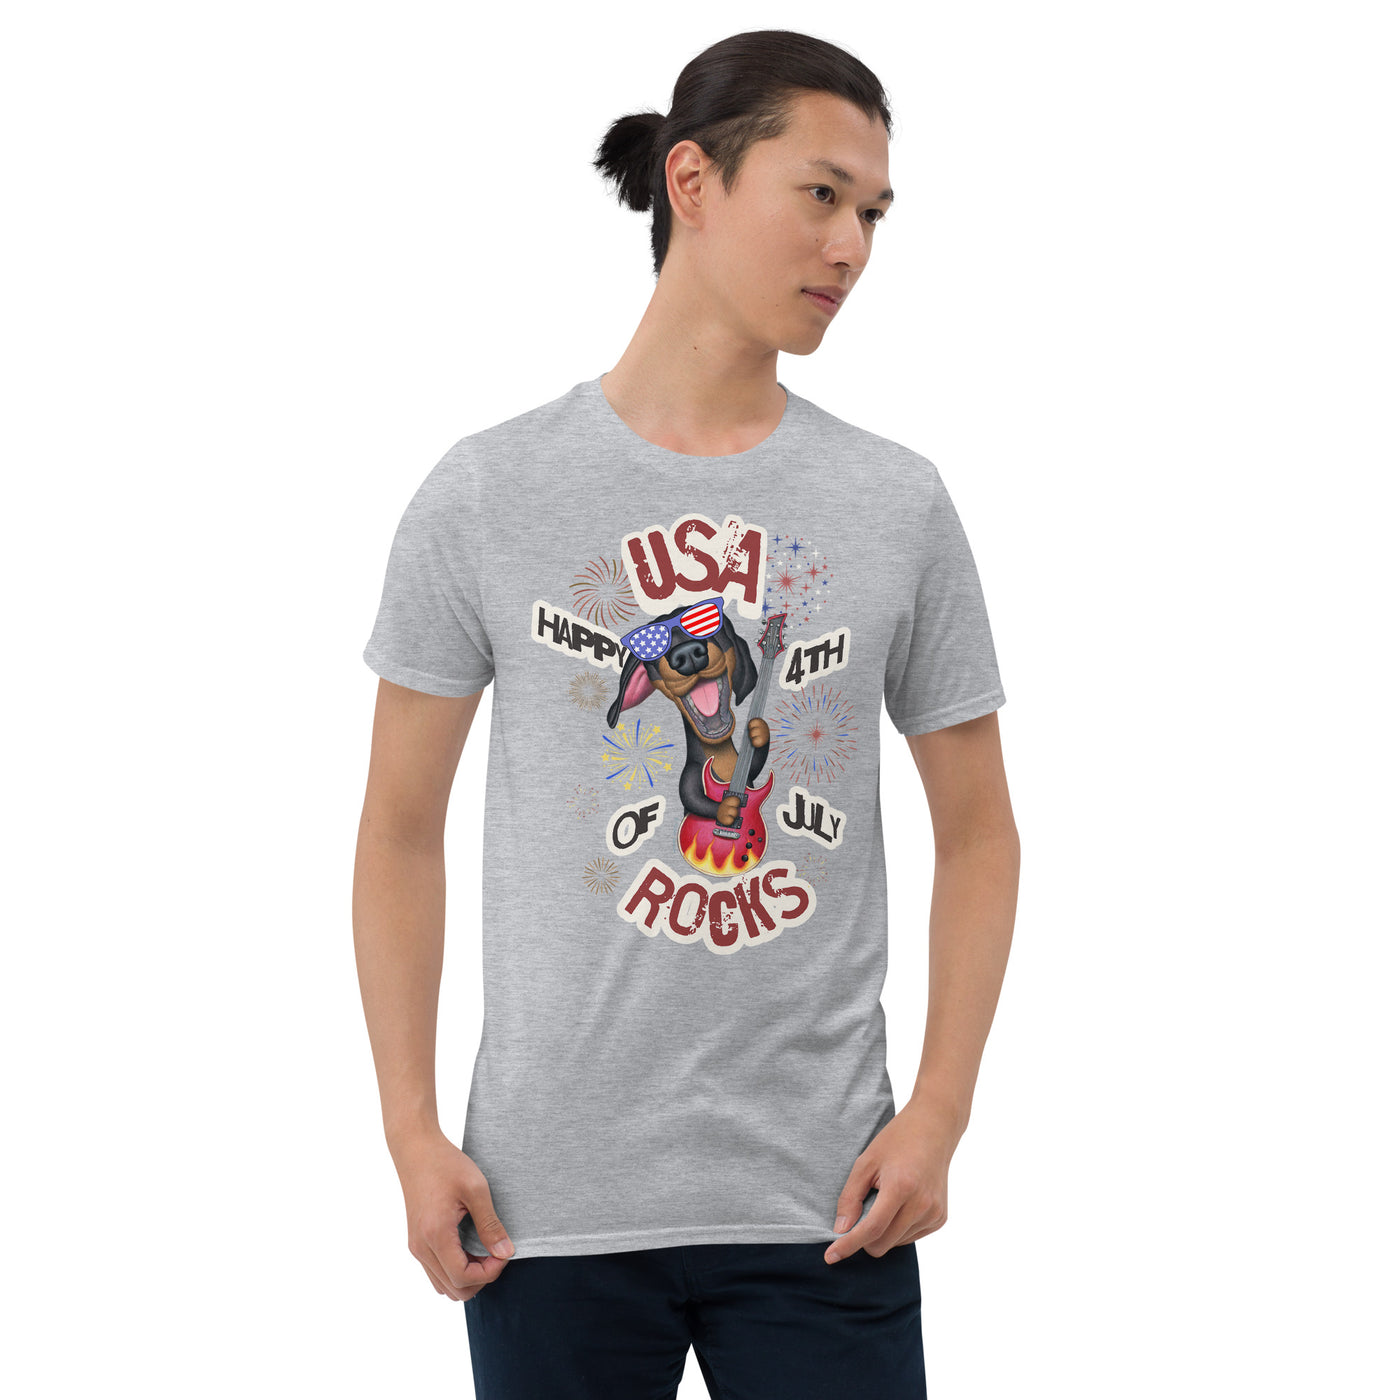 4th of July Fireworks Unisex T-Shirt